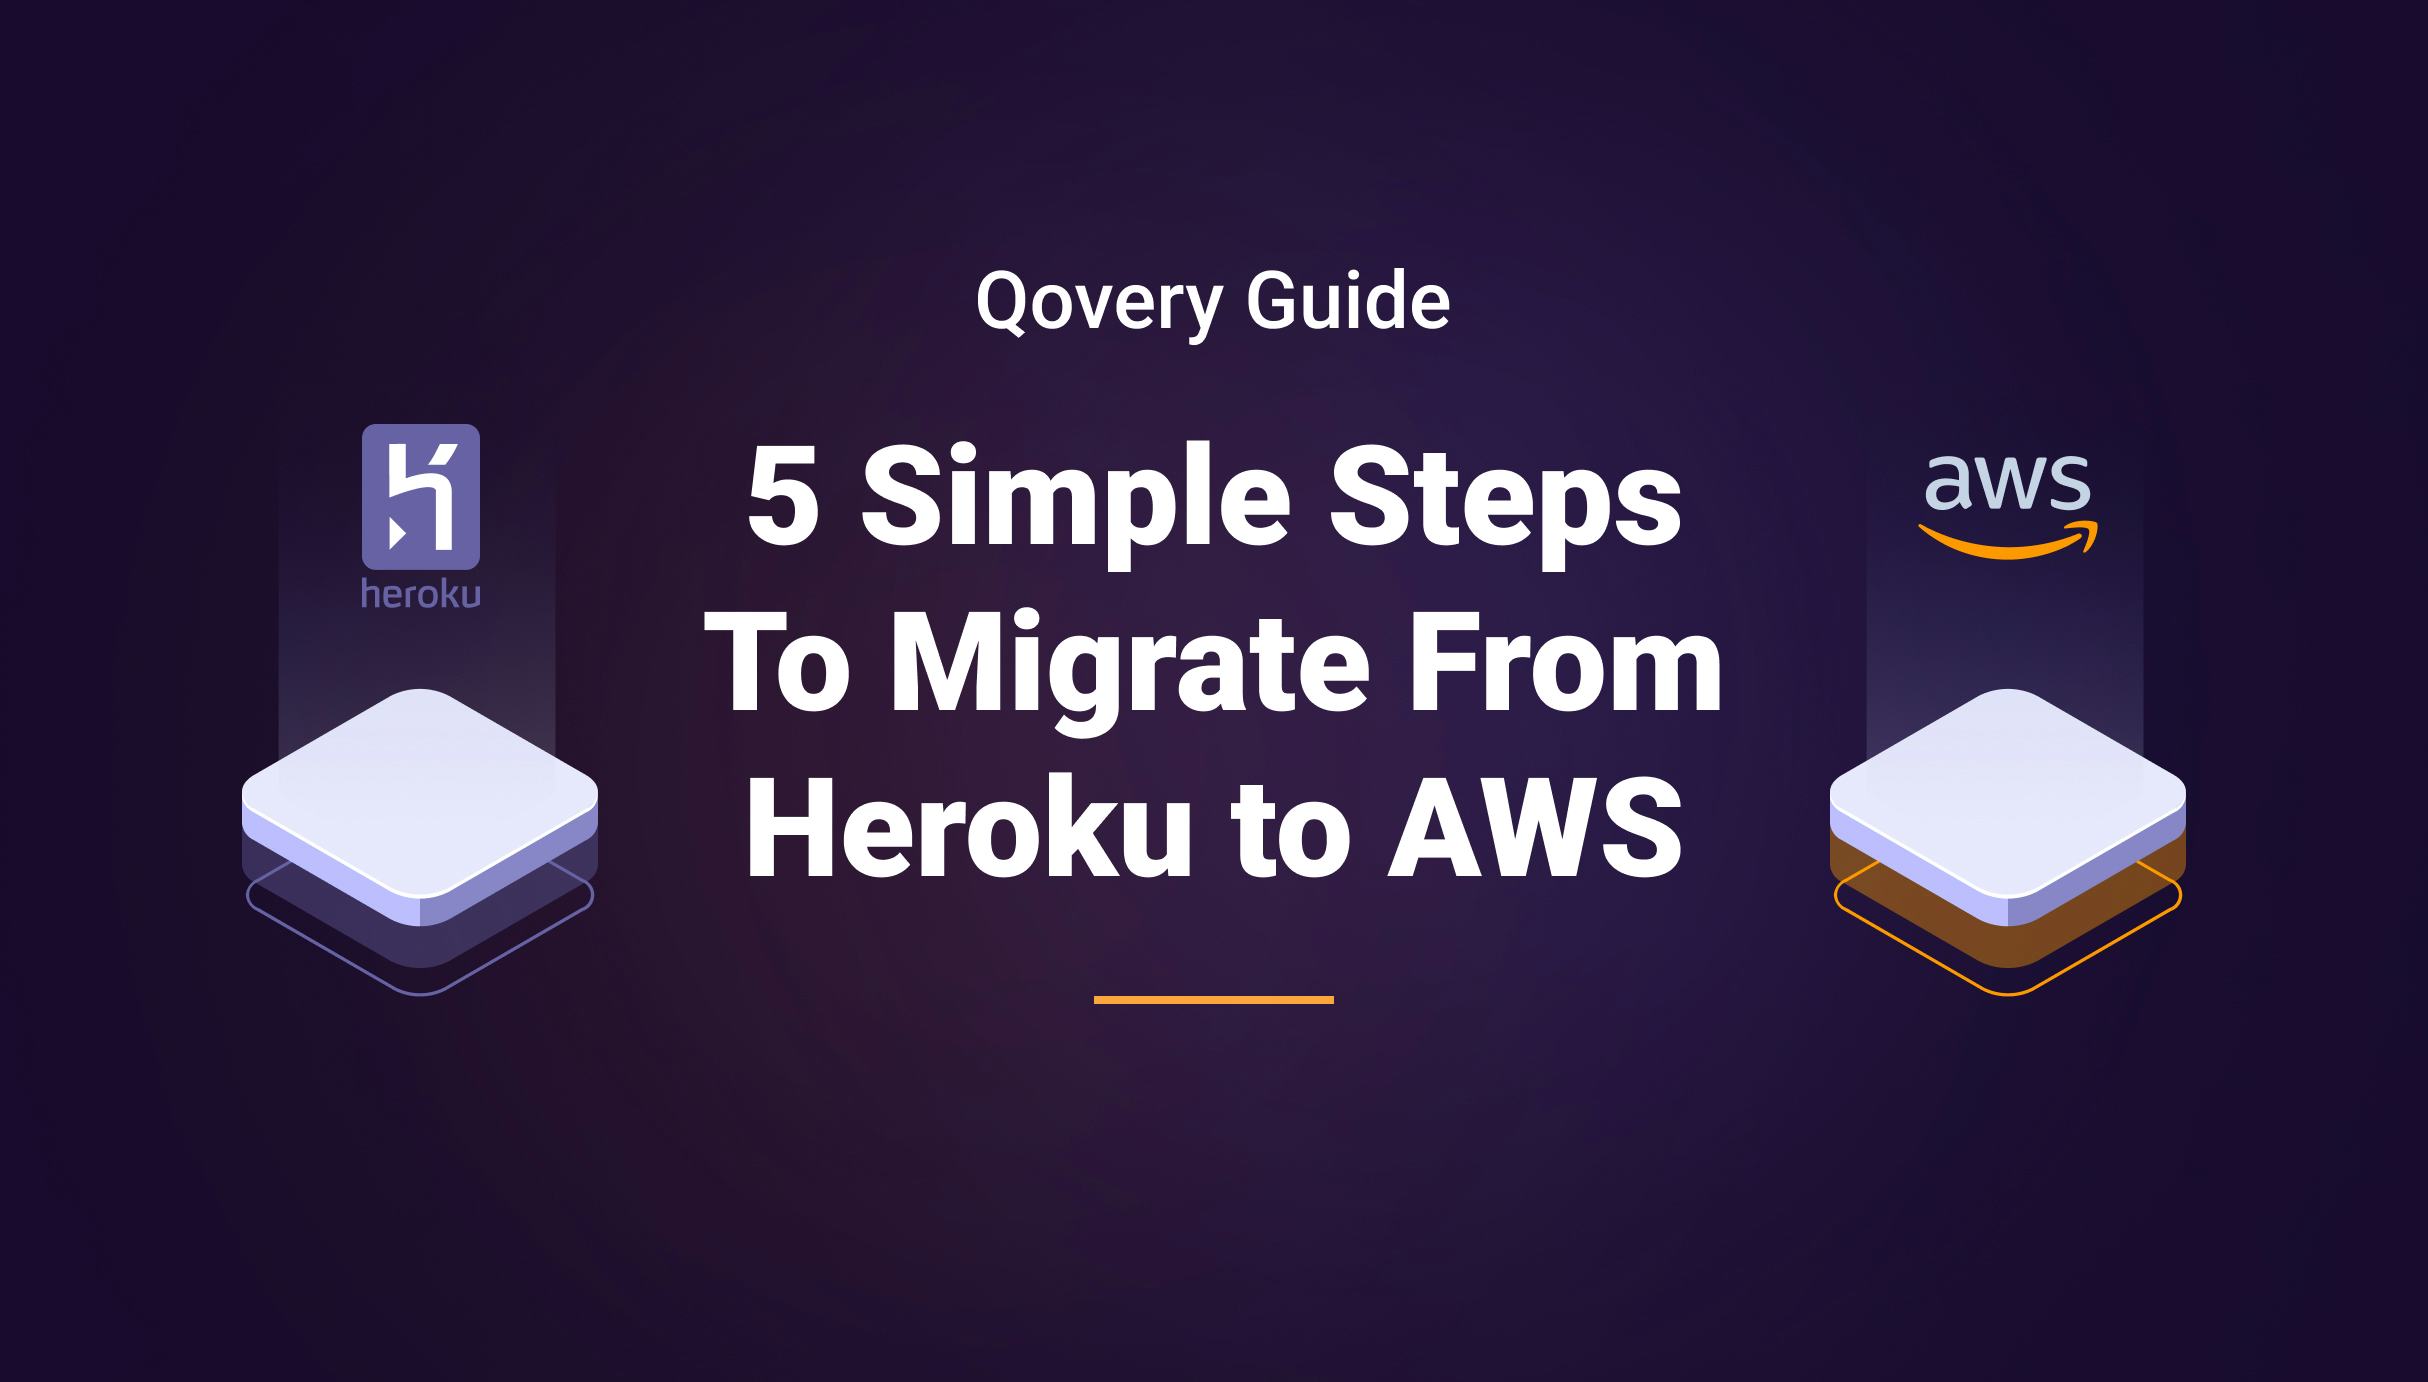 5 Simple Steps To Migrate From Heroku to AWS